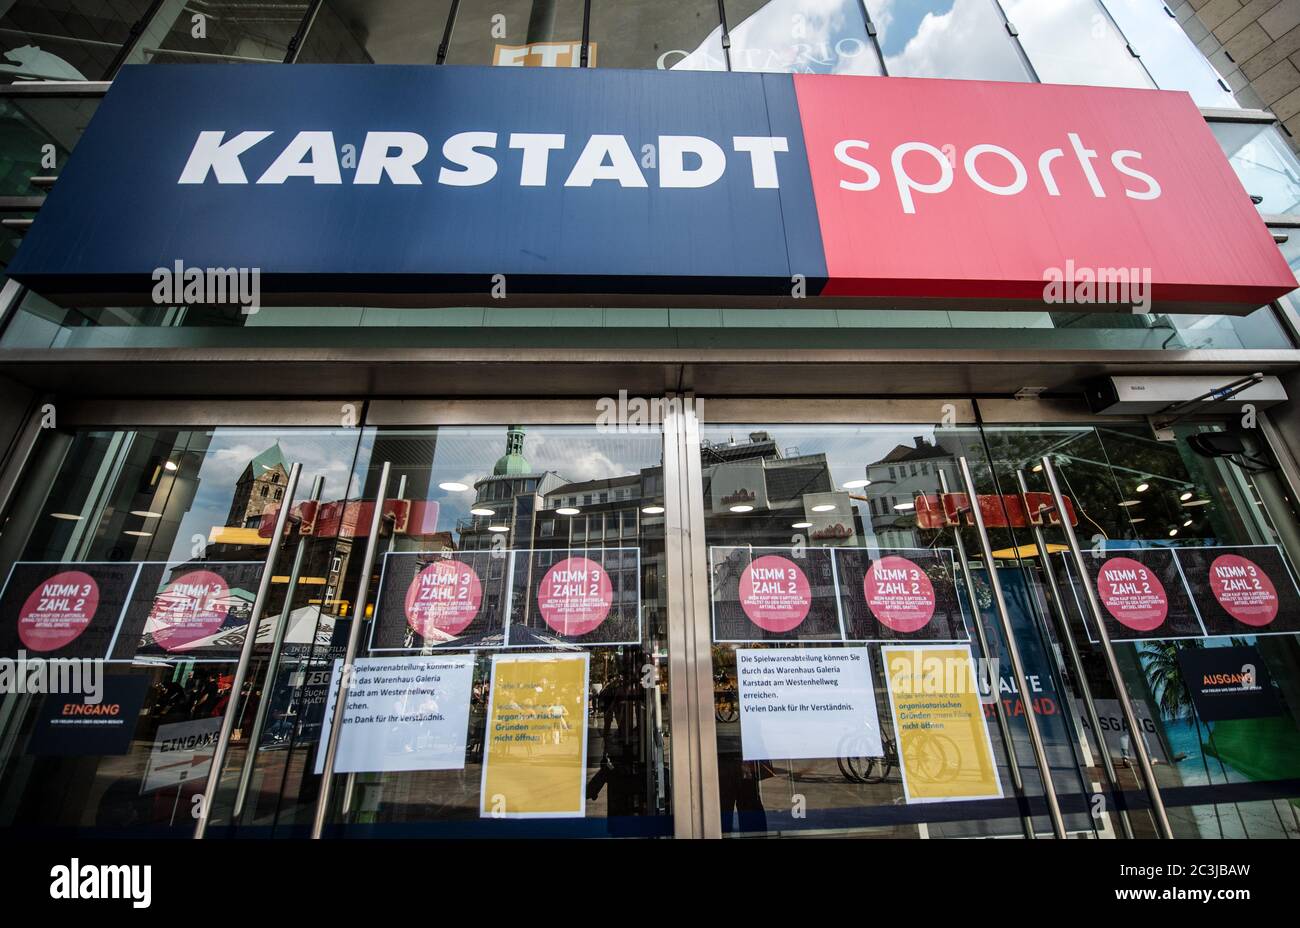 Dortmund, Germany. 20th June, 2020. The doors of a branch of Karstadt Sports are locked. In addition to the planned closure of dozens of branches of the department store chain Galeria Karstadt Kaufhof, 20 of the 30 branches of the Karstadt Sports subsidiary are also to be closed. Credit: Bernd Thissen/dpa/Alamy Live News Stock Photo